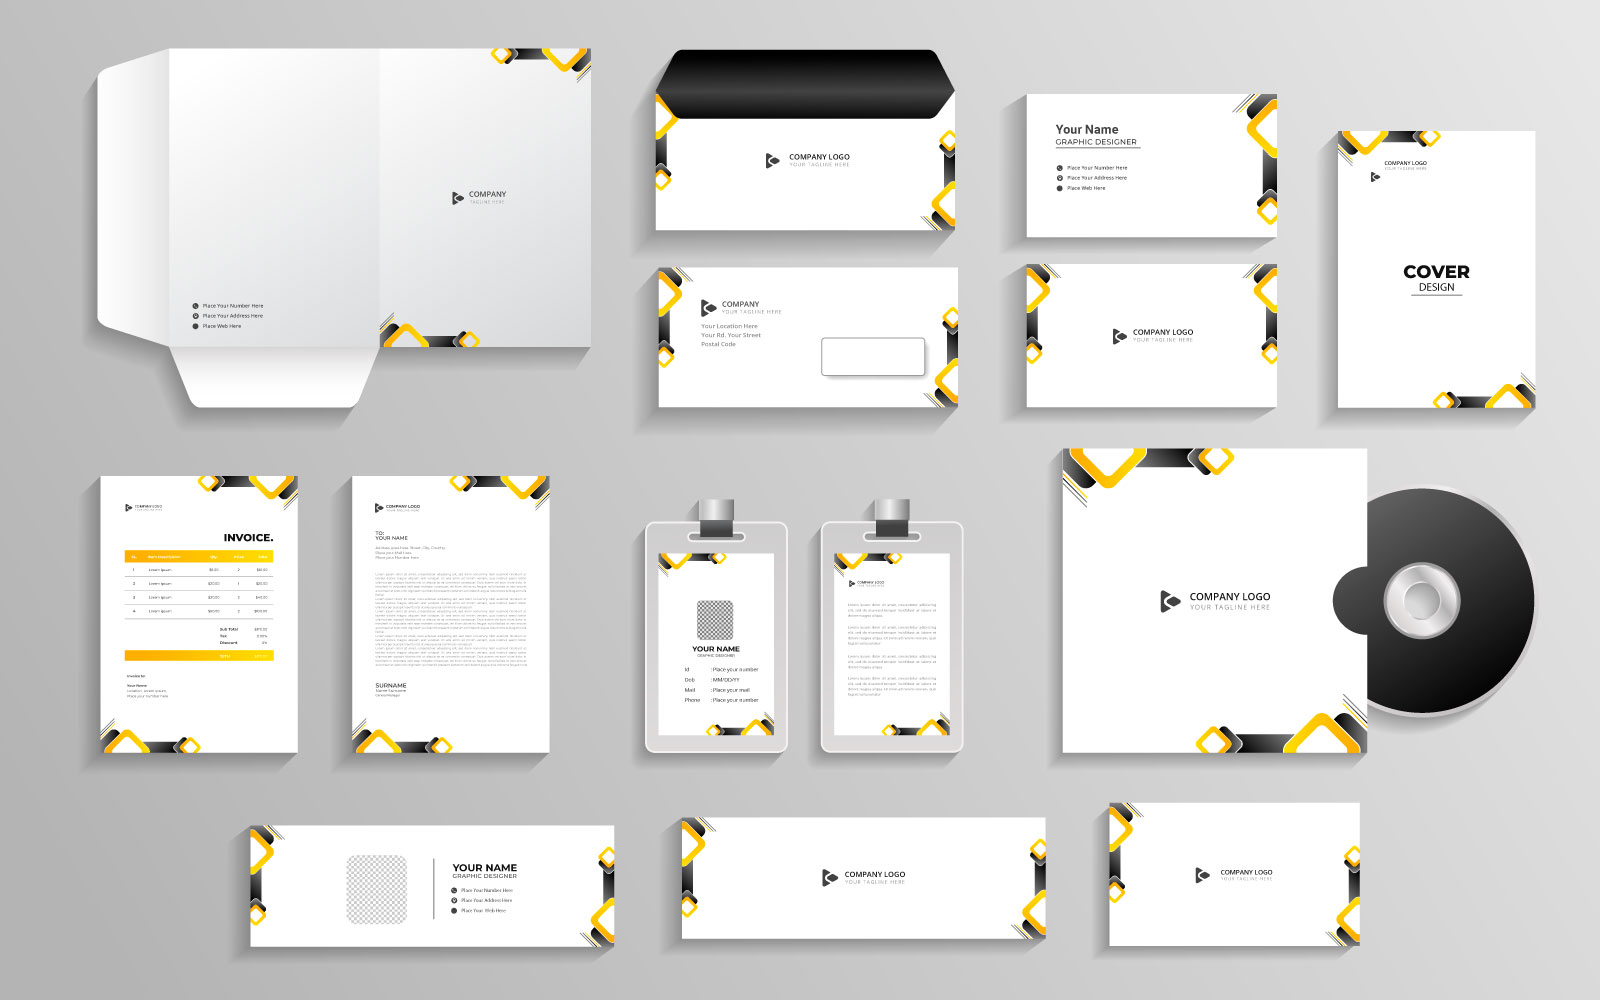 Corporate branding identity with office stationery items and objects Mockup set